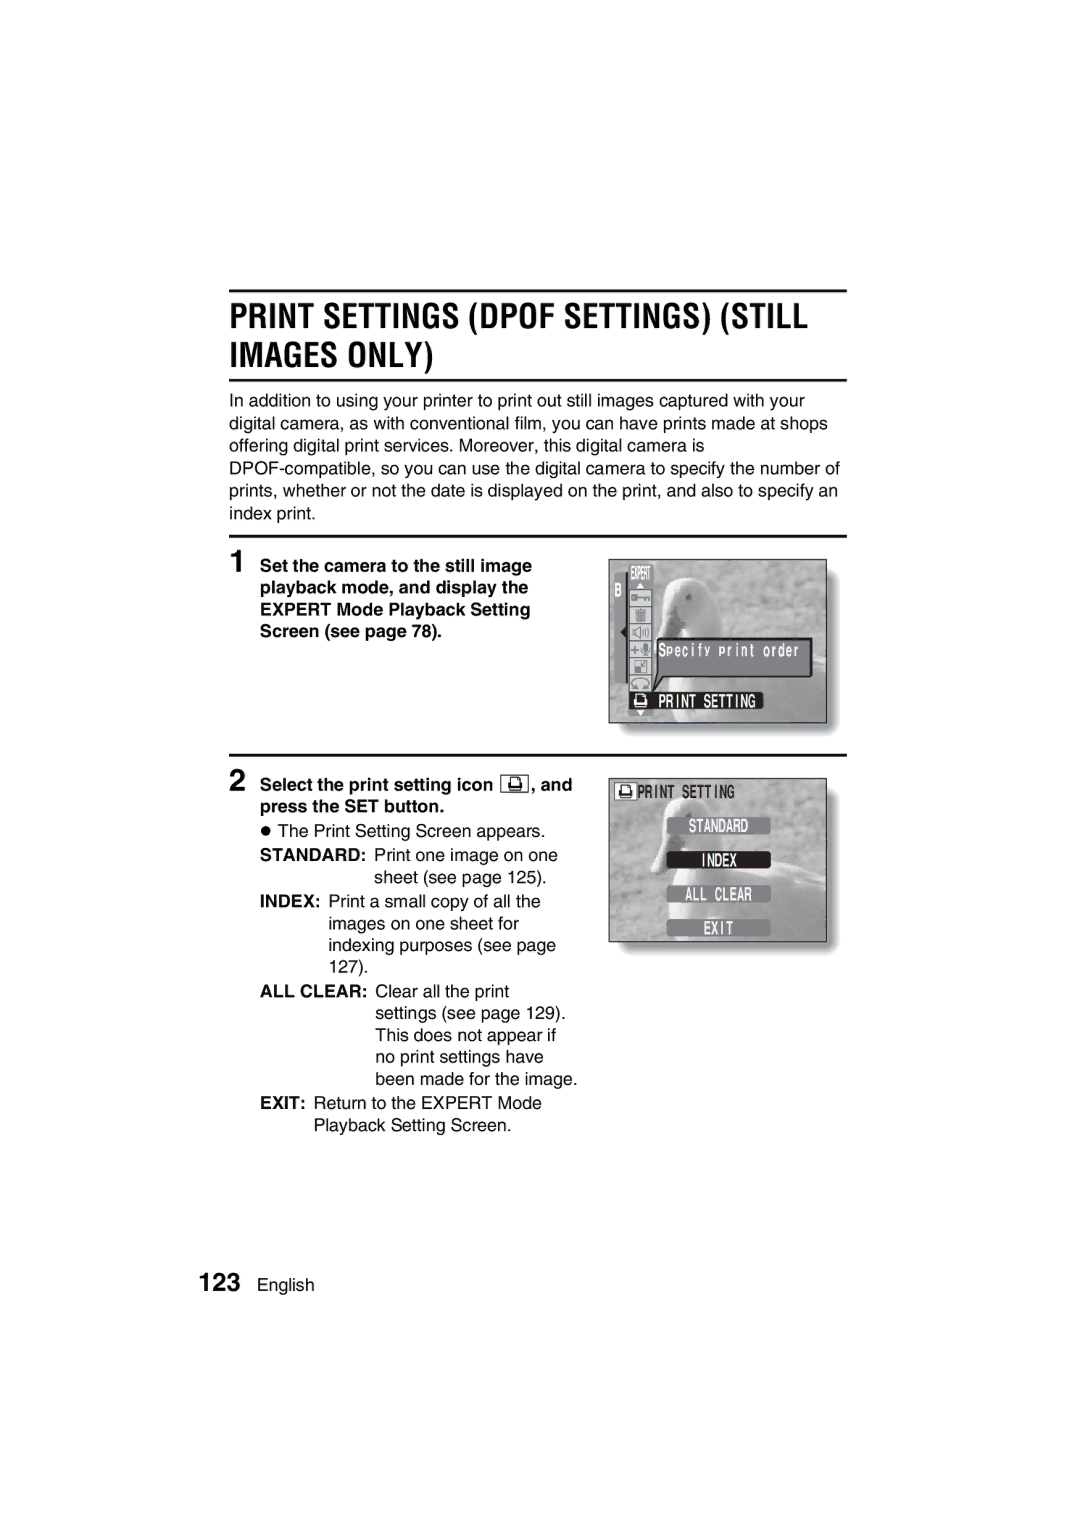 Sanyo VPC-J1EX Print Settings Dpof Settings Still Images only, Select the print setting icon n, and press the SET button 